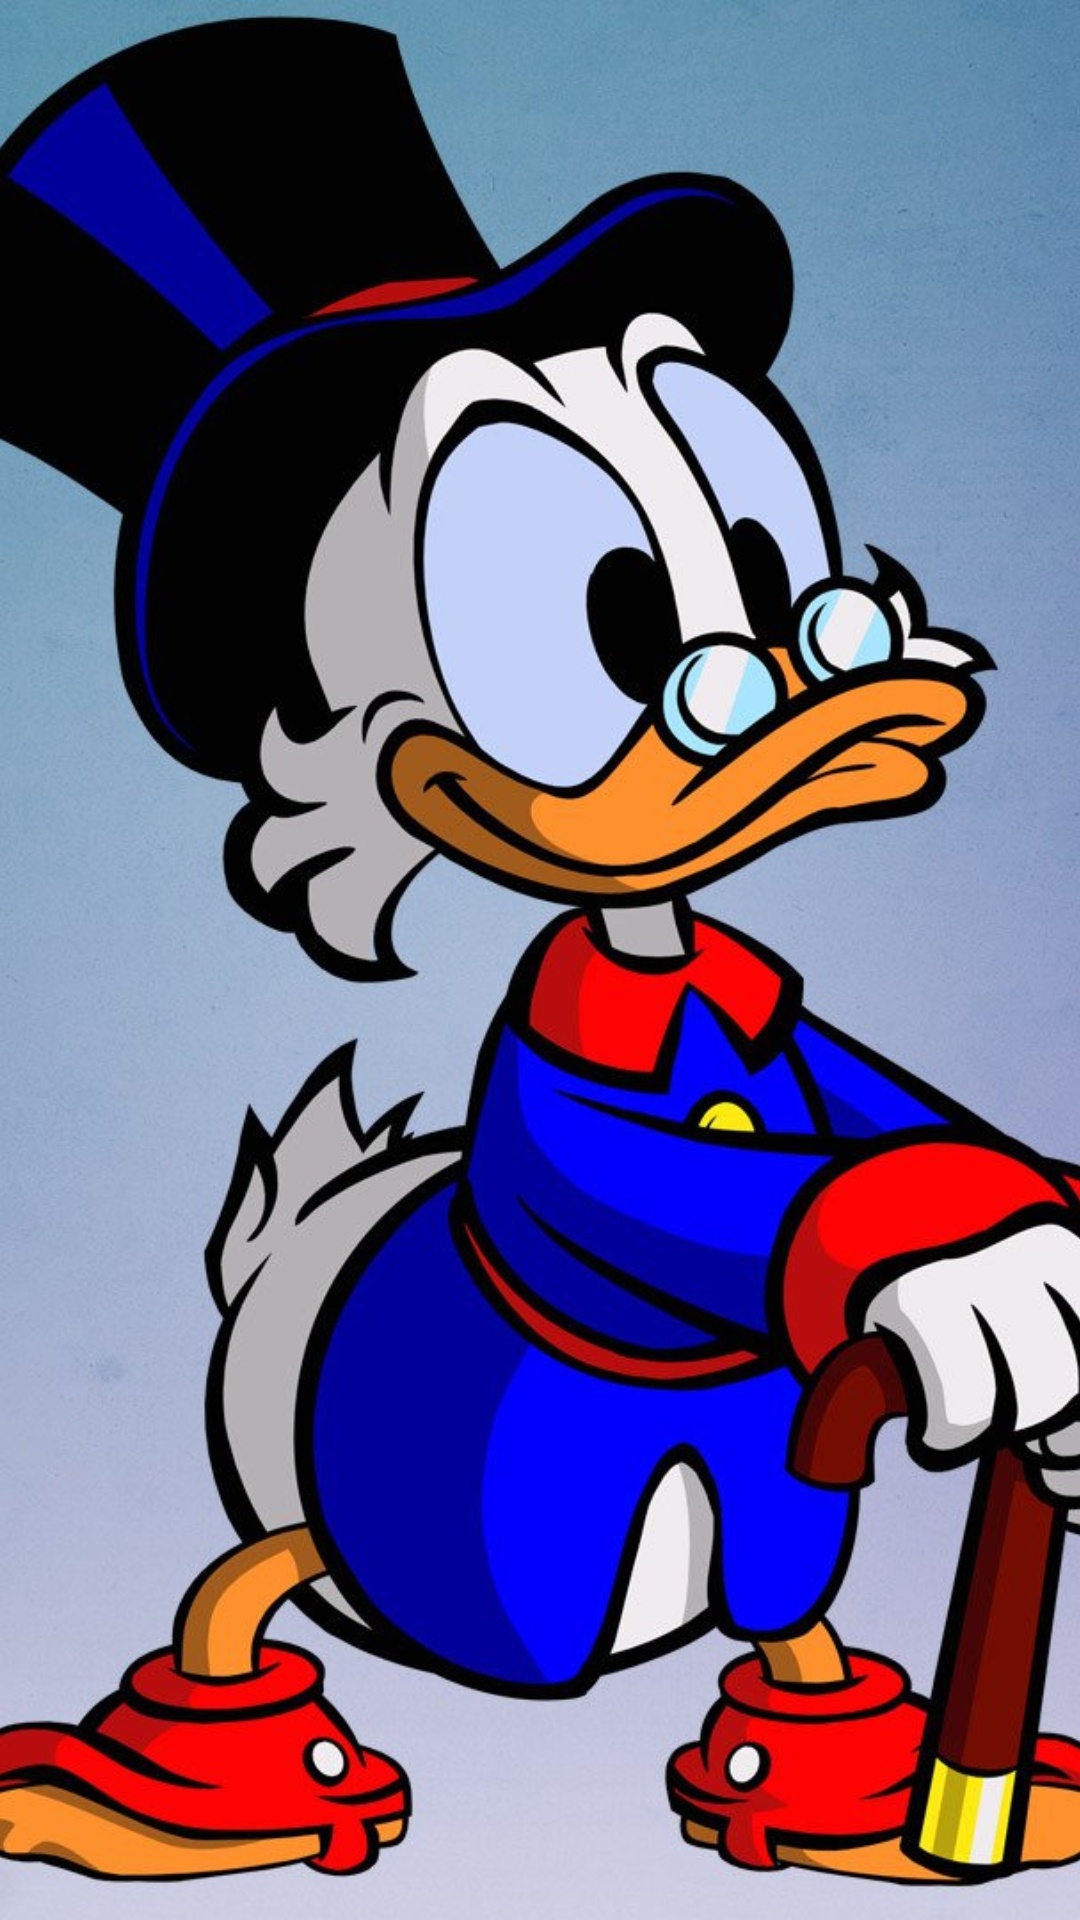 DuckTales Animation, Ducktales Remastered, Full HD wallpapers, 1080x1920 Full HD Phone